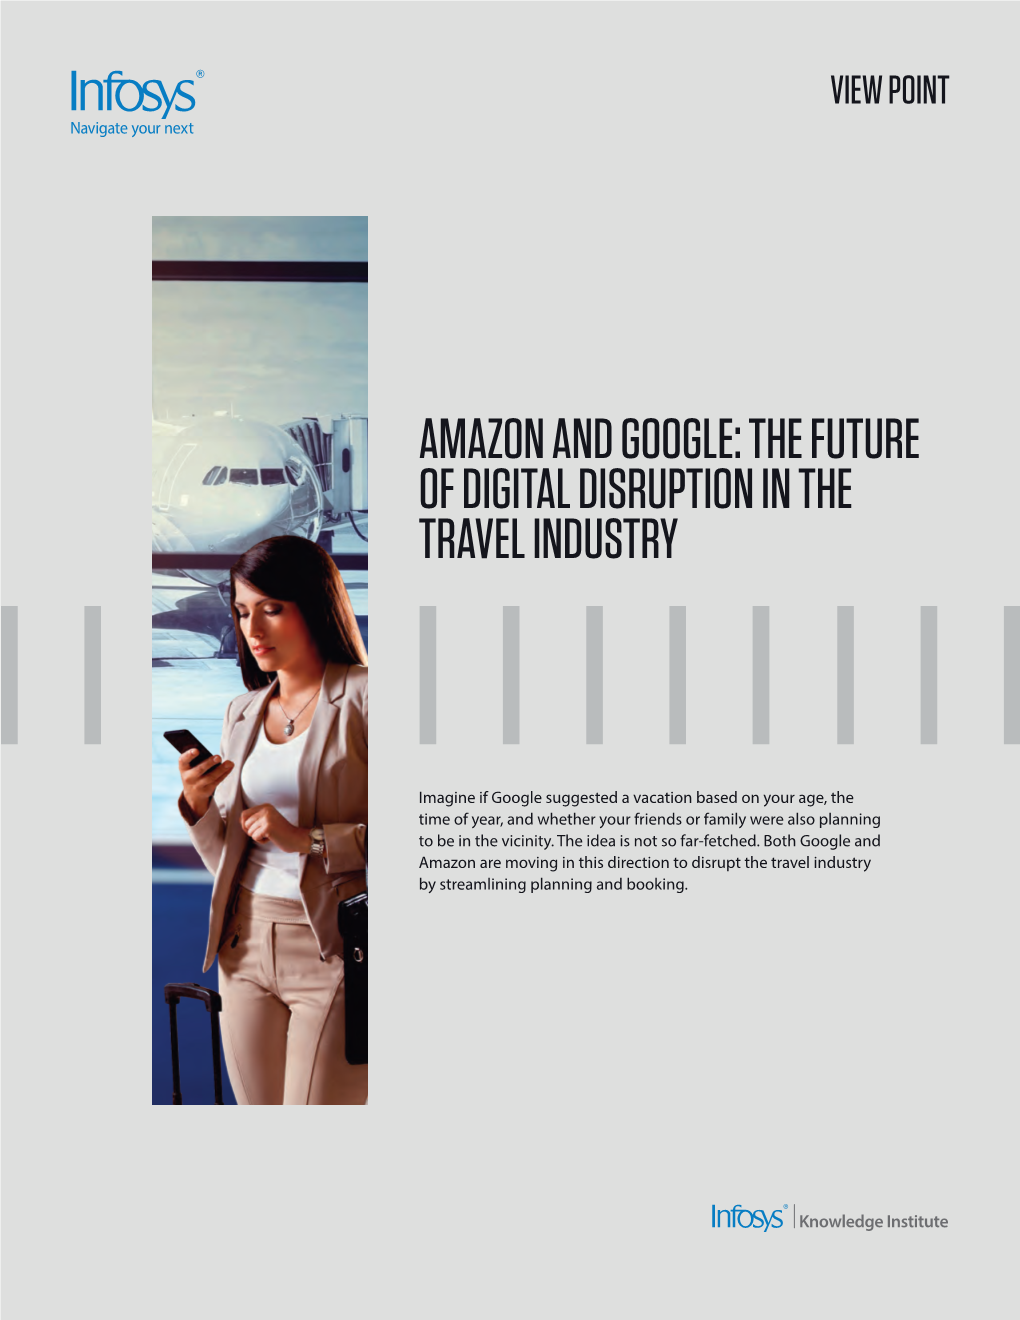 Amazon and Google: the Future of Digital Disruption in the Travel Industry